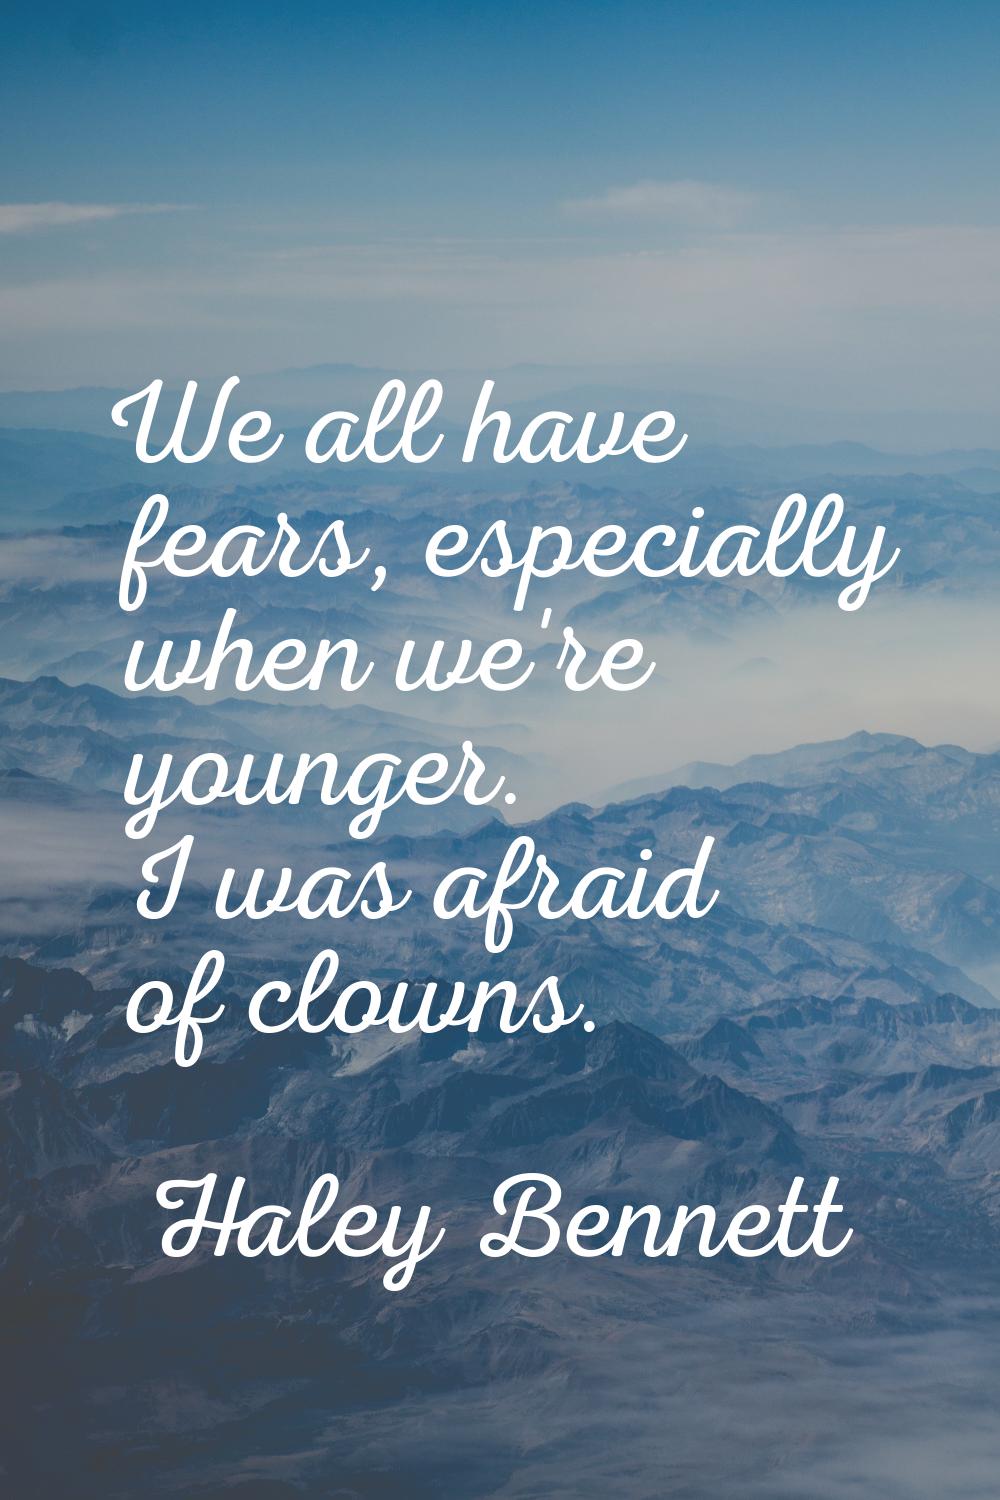 We all have fears, especially when we're younger. I was afraid of clowns.